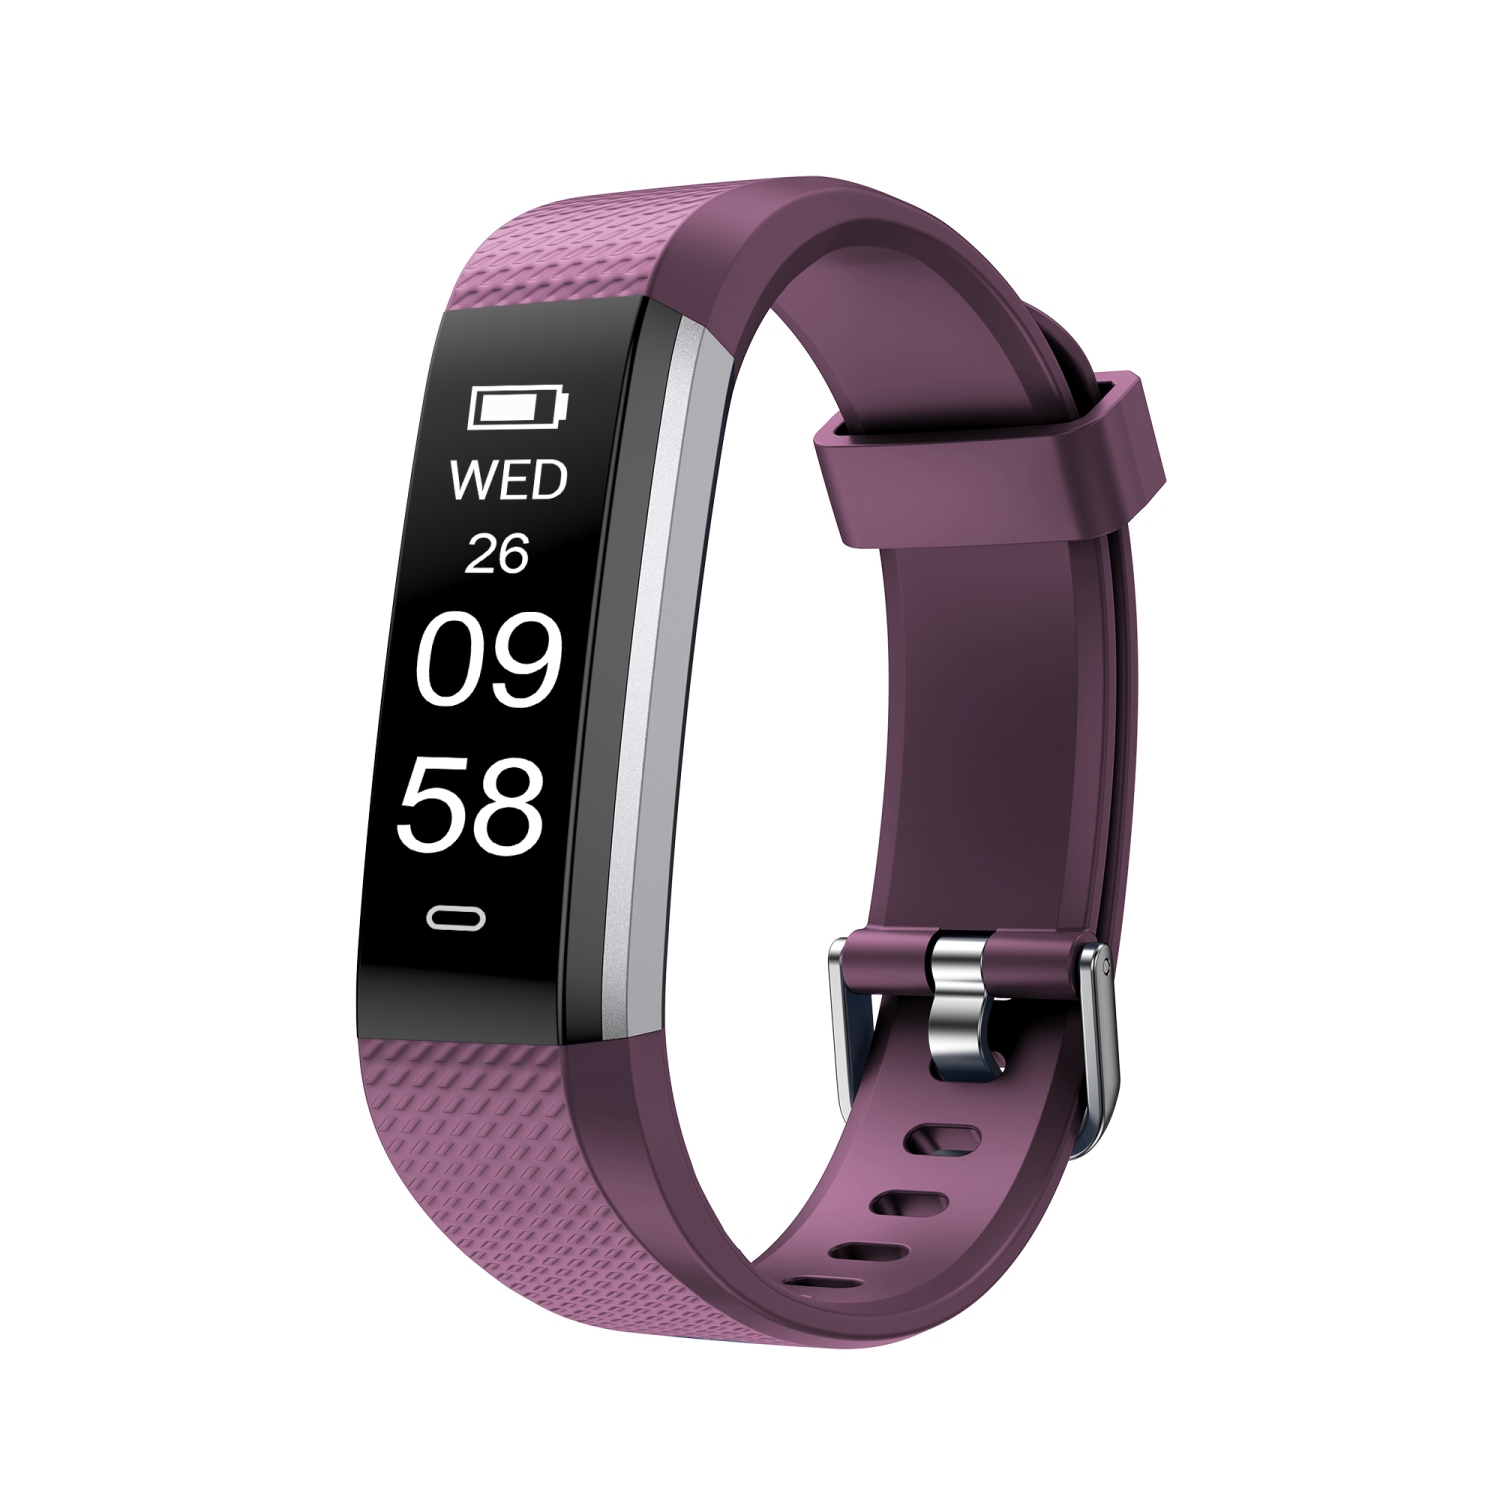 Letscom ID115 Health and Fitness Tracker by Letsfit - Purple